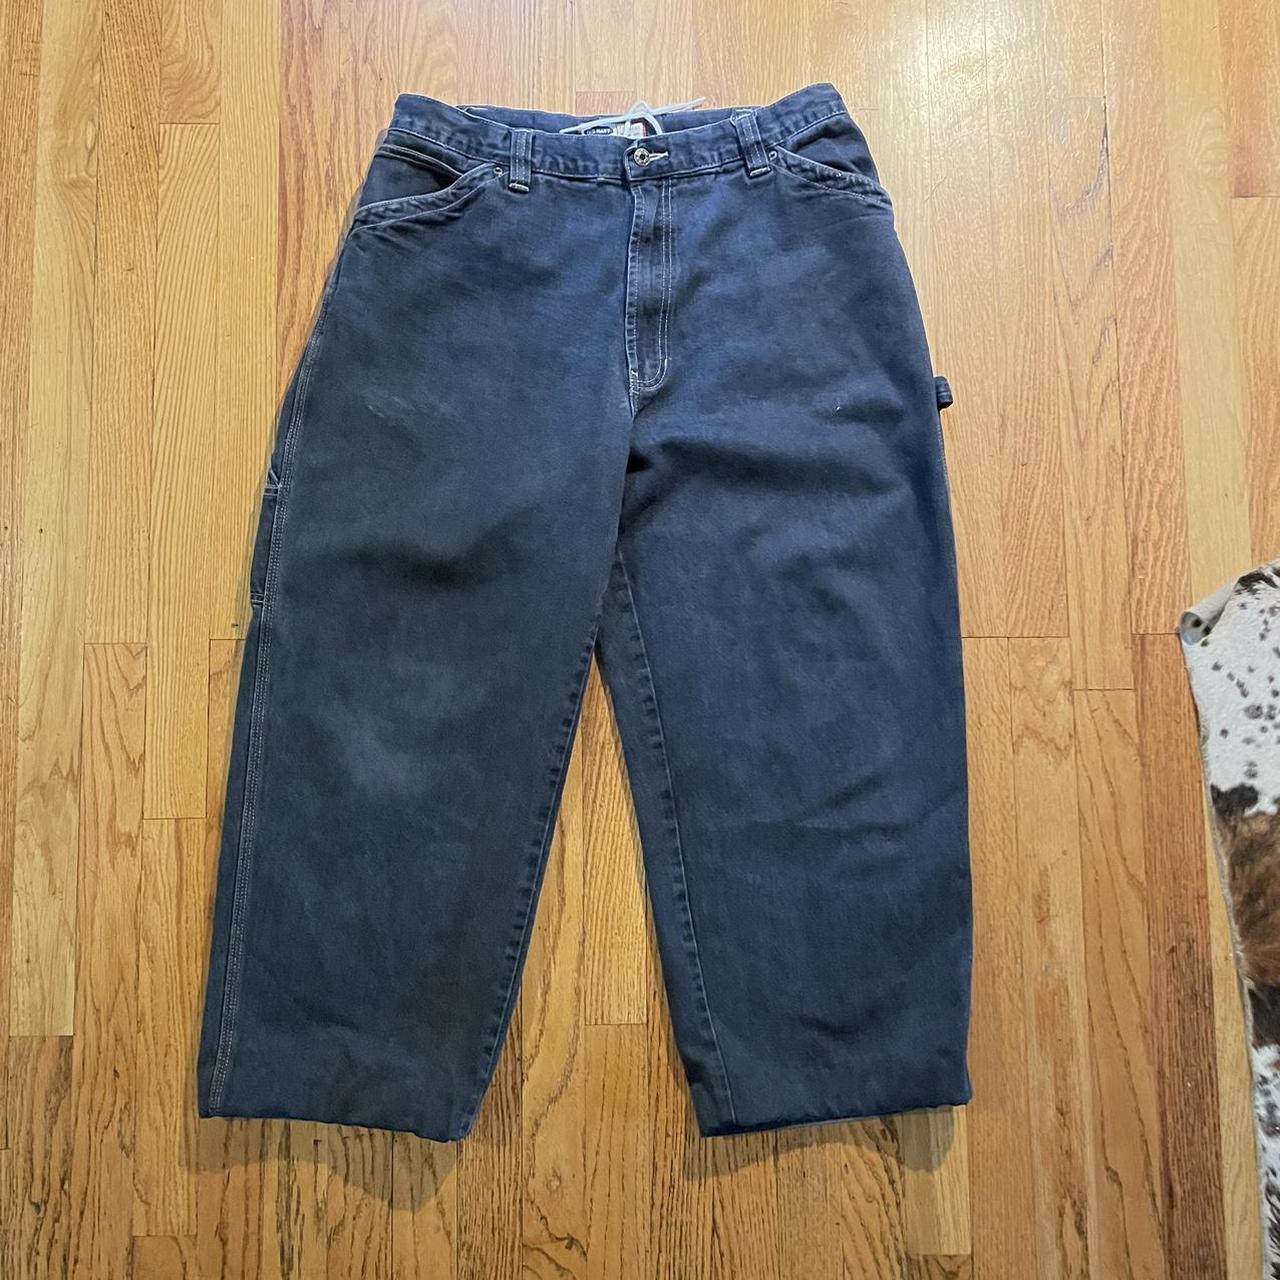 Old Navy Men's Navy and White Jeans | Depop